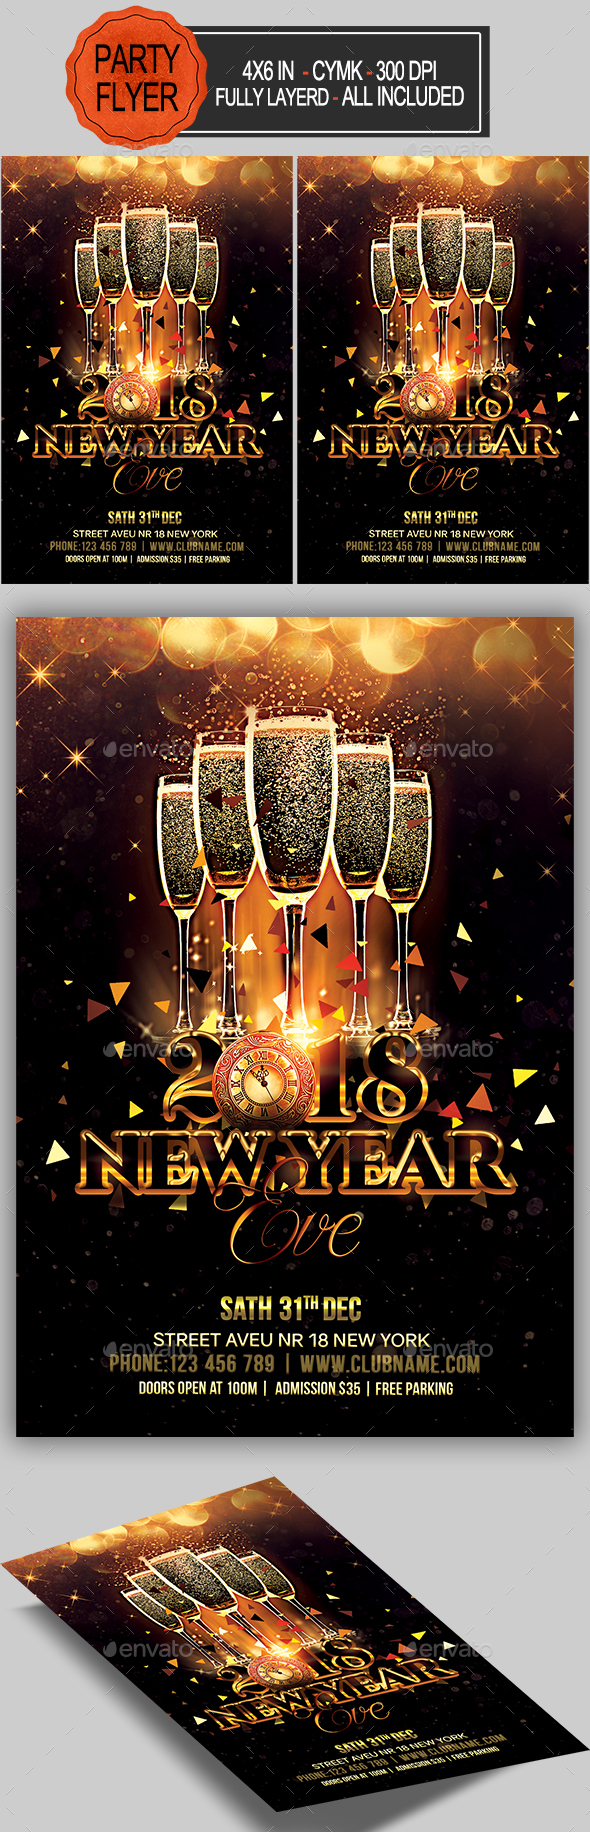 GraphicRiver New Year Party Flyer 20831383